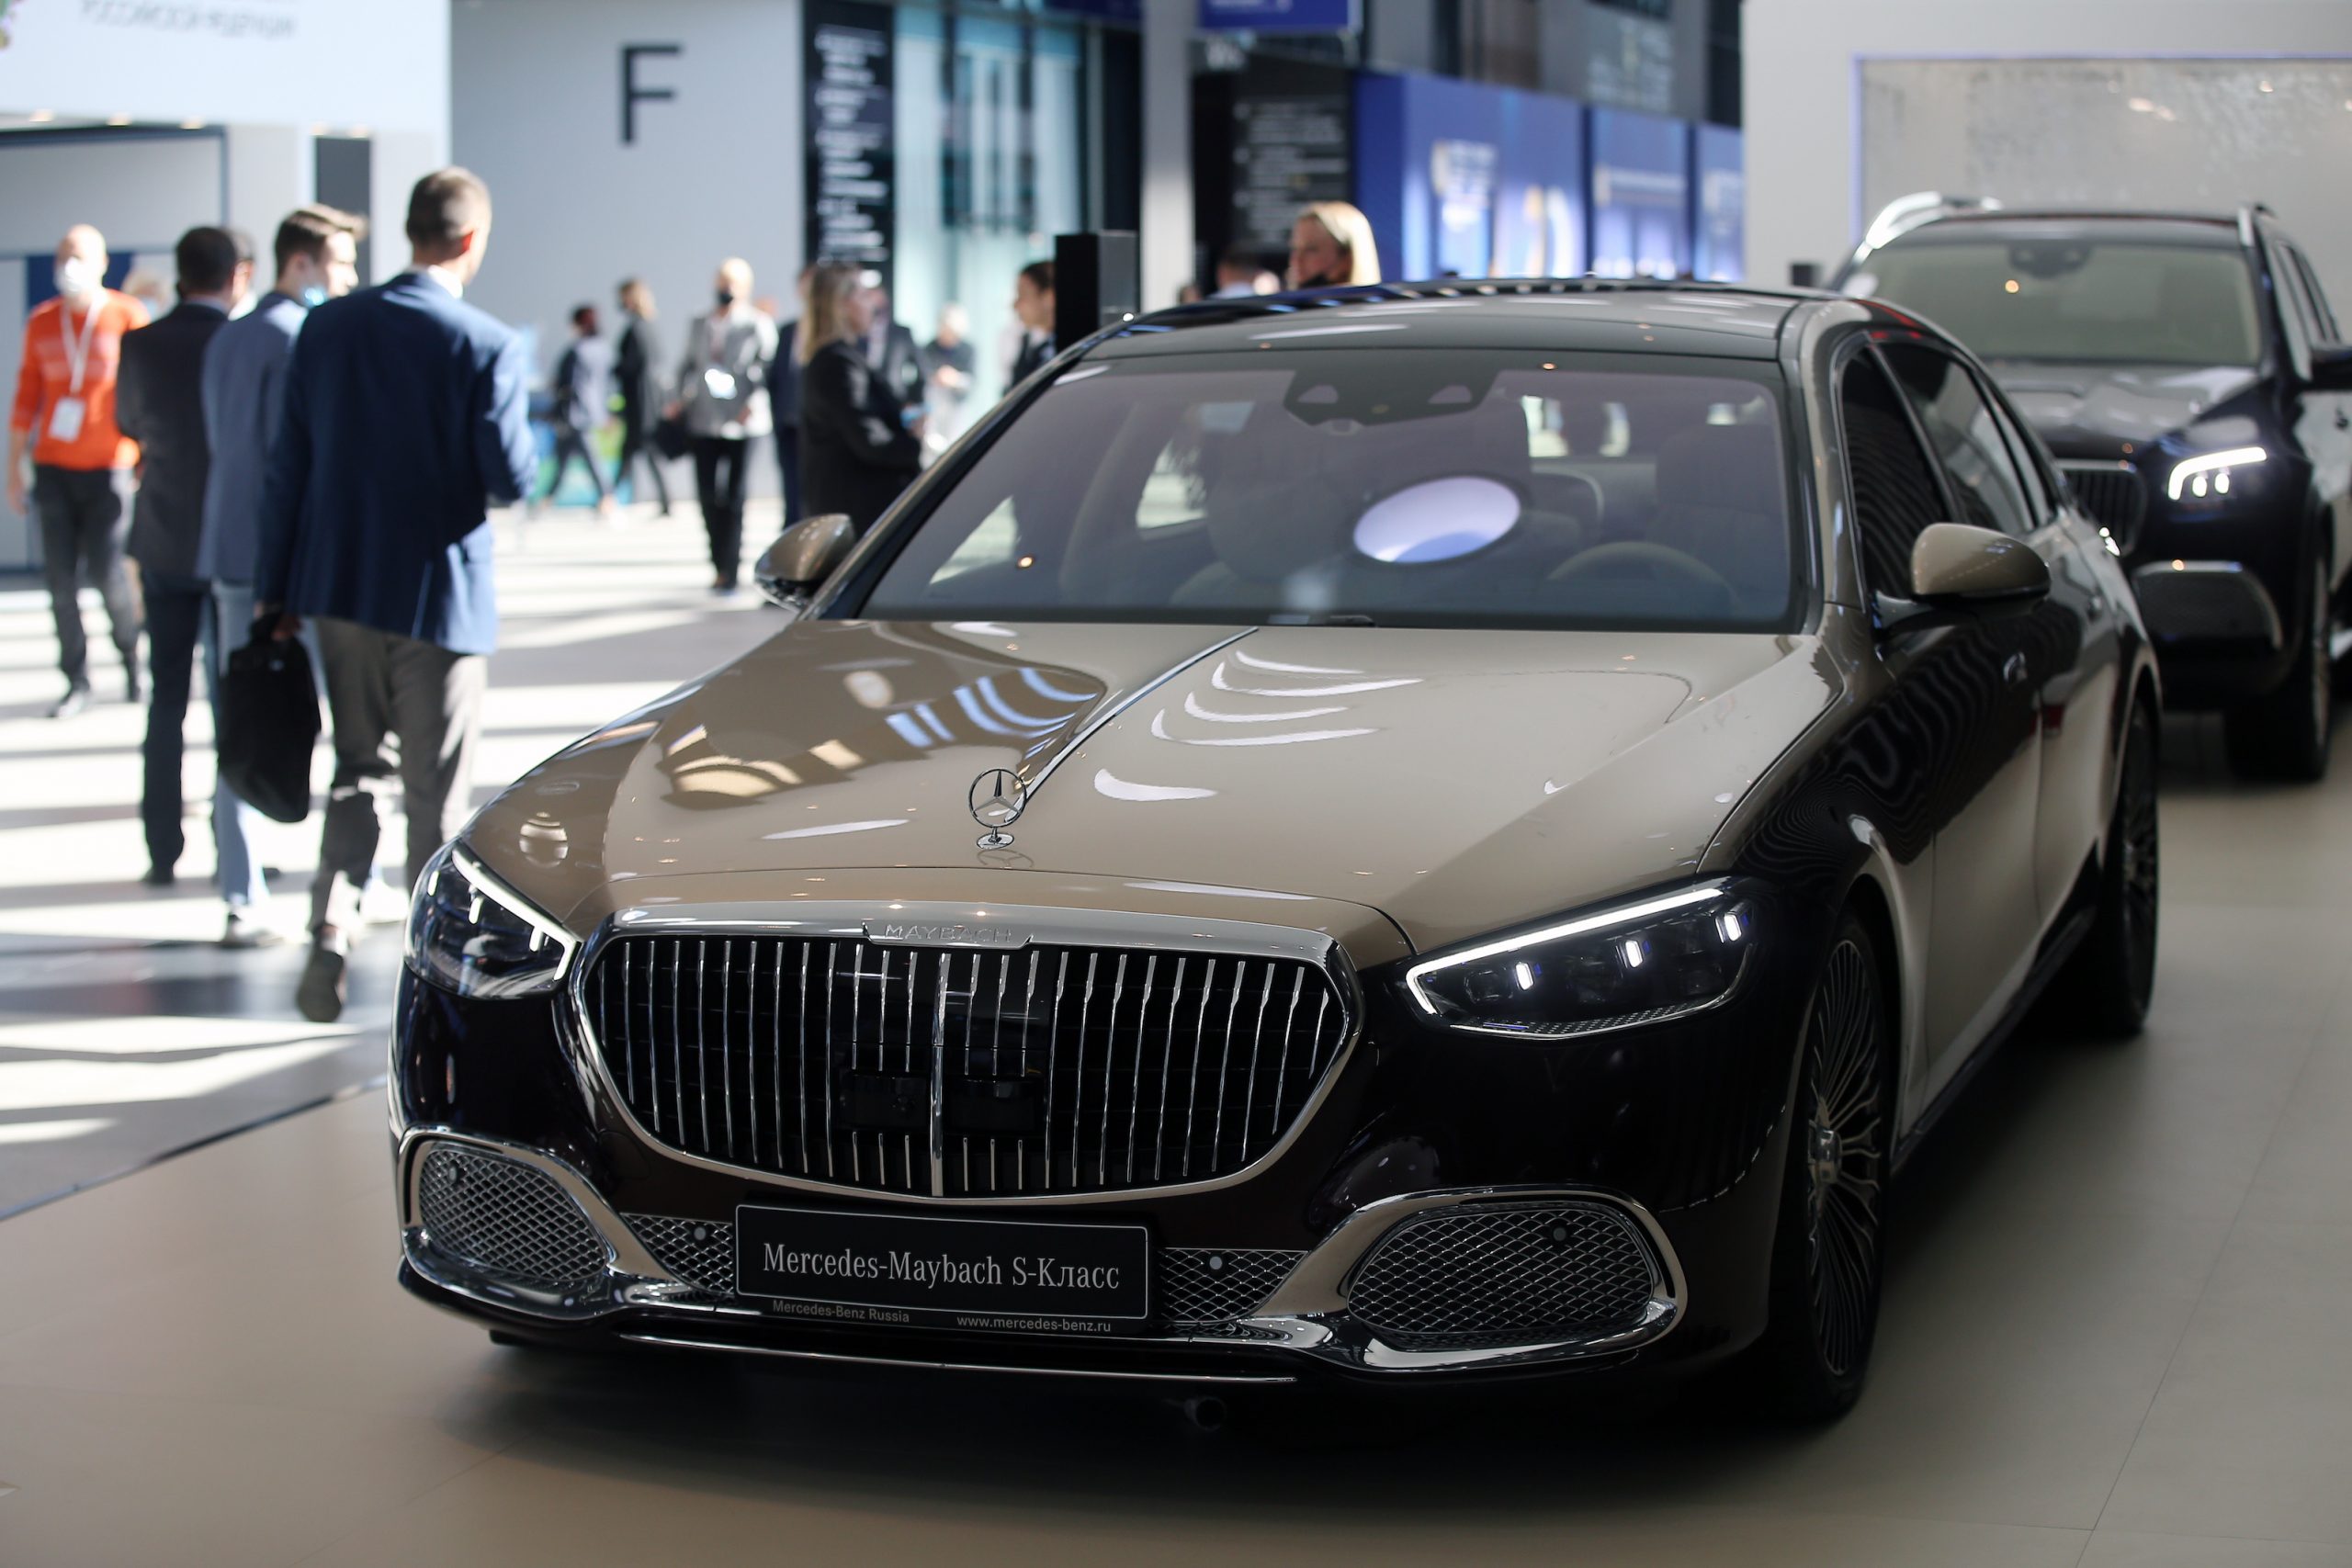 The new Mercedes-Maybach S-Class vehicle is pictured during a ceremony to reveal the Mercedes-Benz strategy at the 24th St Petersburg International Economic Forum